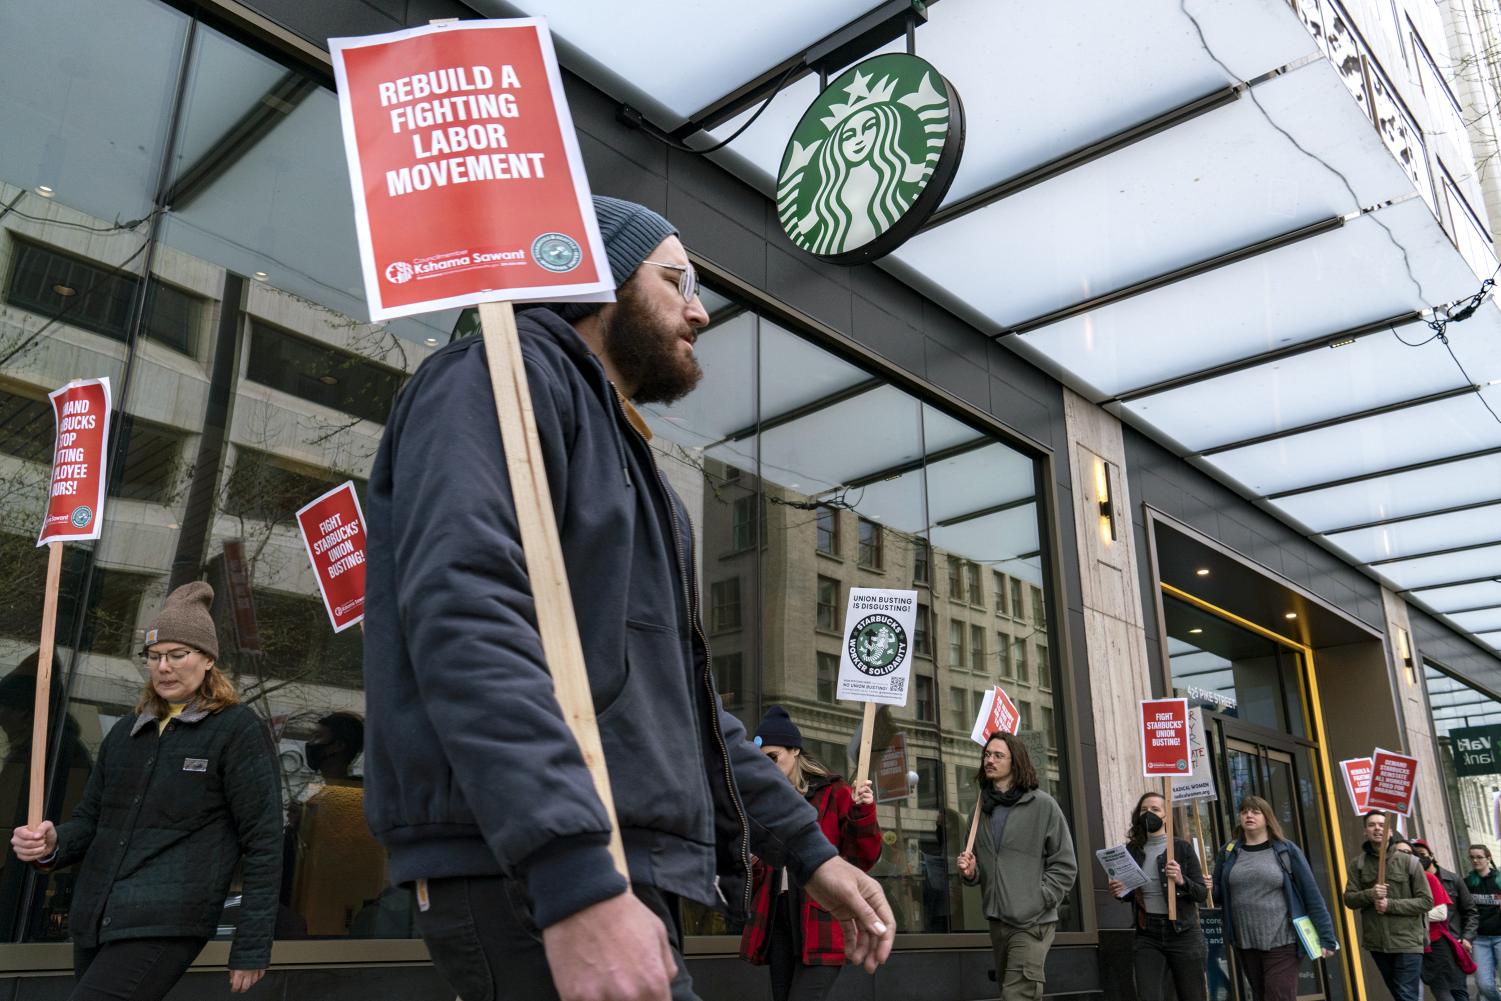 Starbucks Kicks Off Crucial Union Talks Amid Sales Slump: What Changes Are Coming?